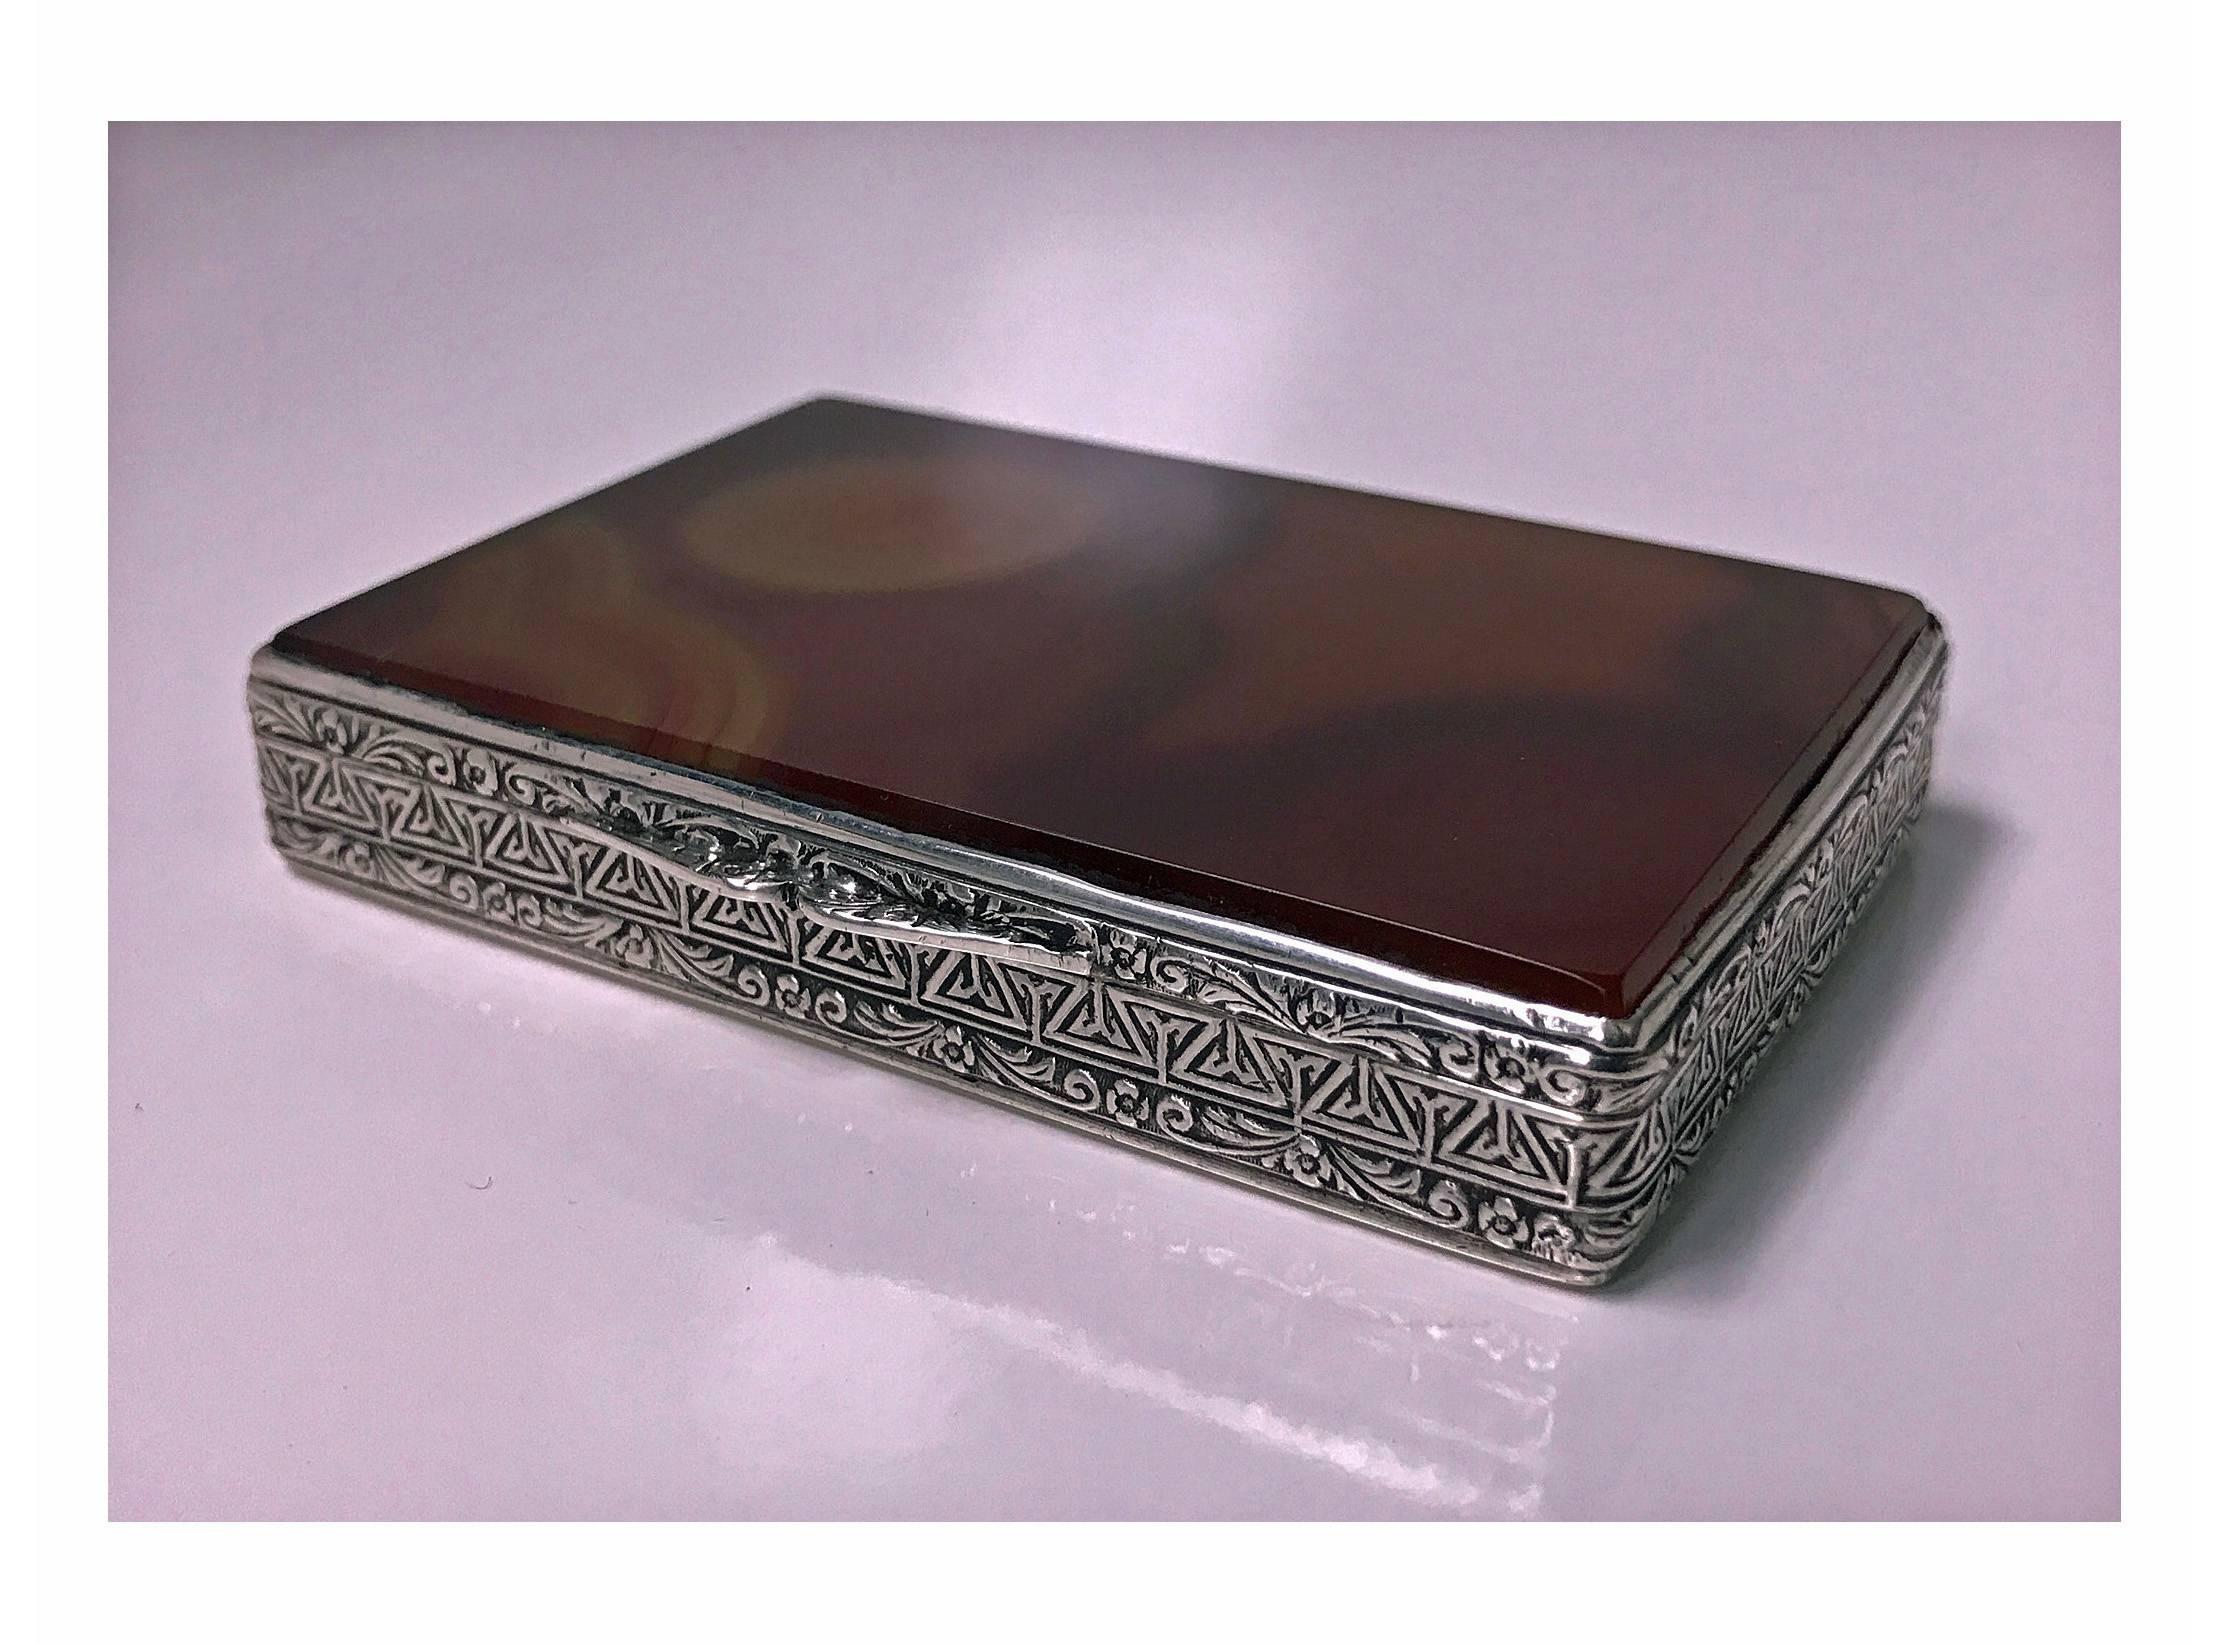 Fratelli Cacchione Agate and Silver Box Case, Italy, C.1955. The rectangular box with banded orange and brown agate cover, the surround of scroll and foliage design, the base of alternate lozenge and wriggle work decoration. Hallmarked on interior